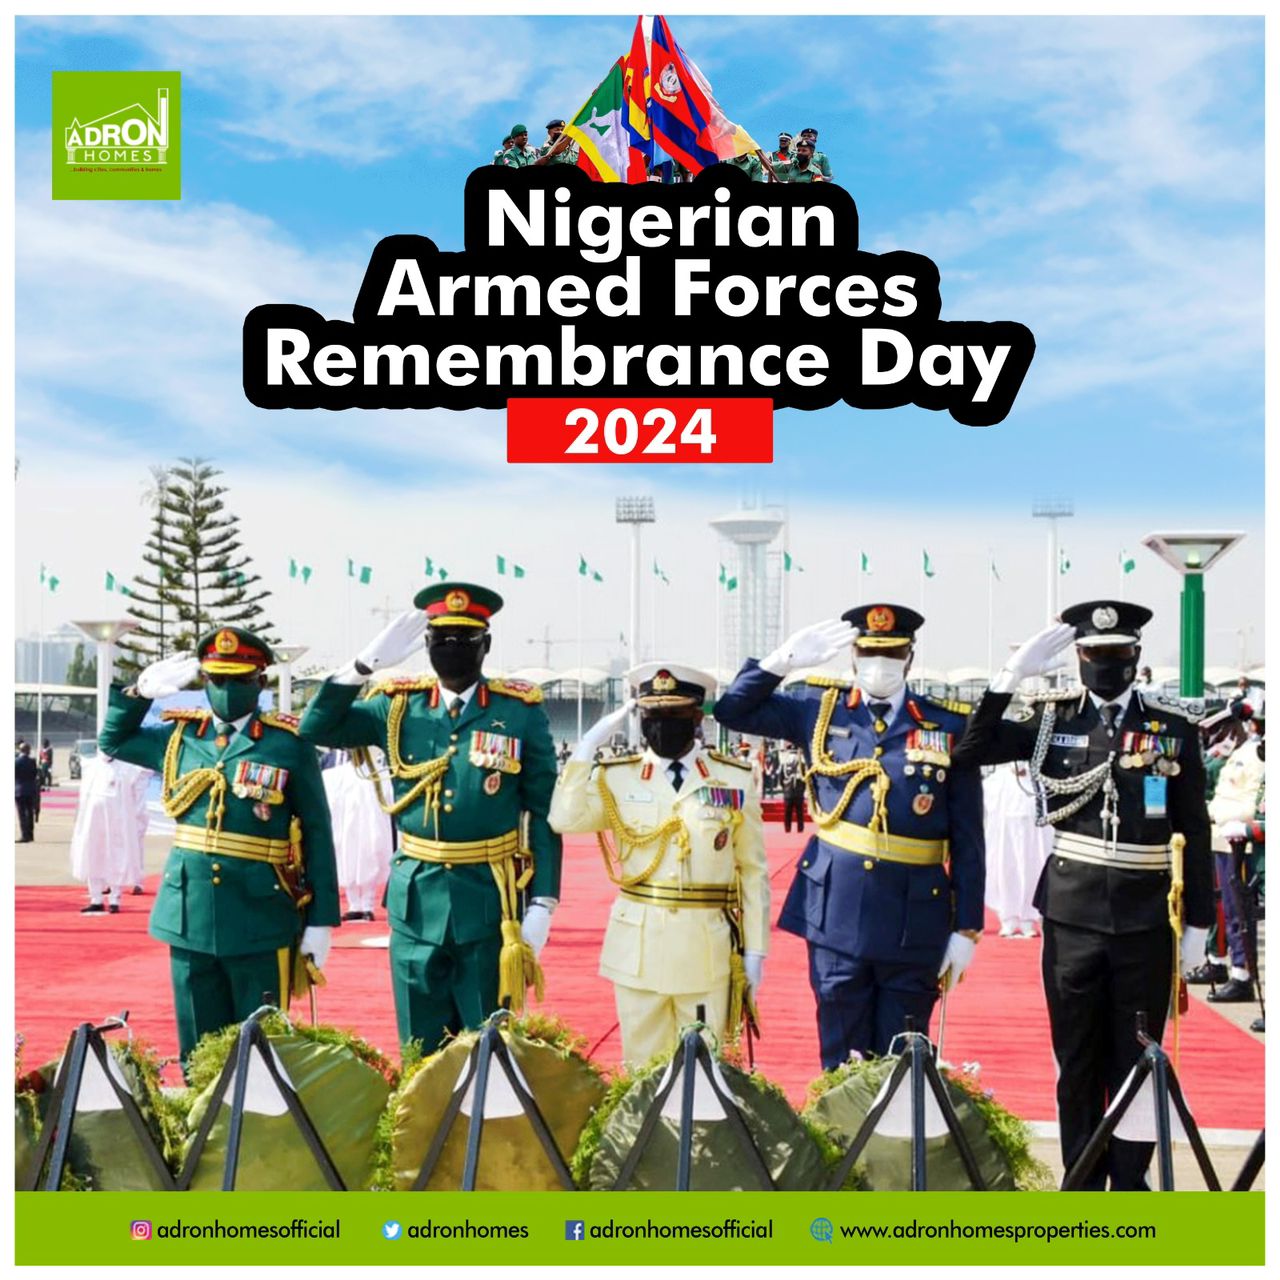 Adron Homes Celebrates Nigerian Army On Armed Forces Remembrance Day 